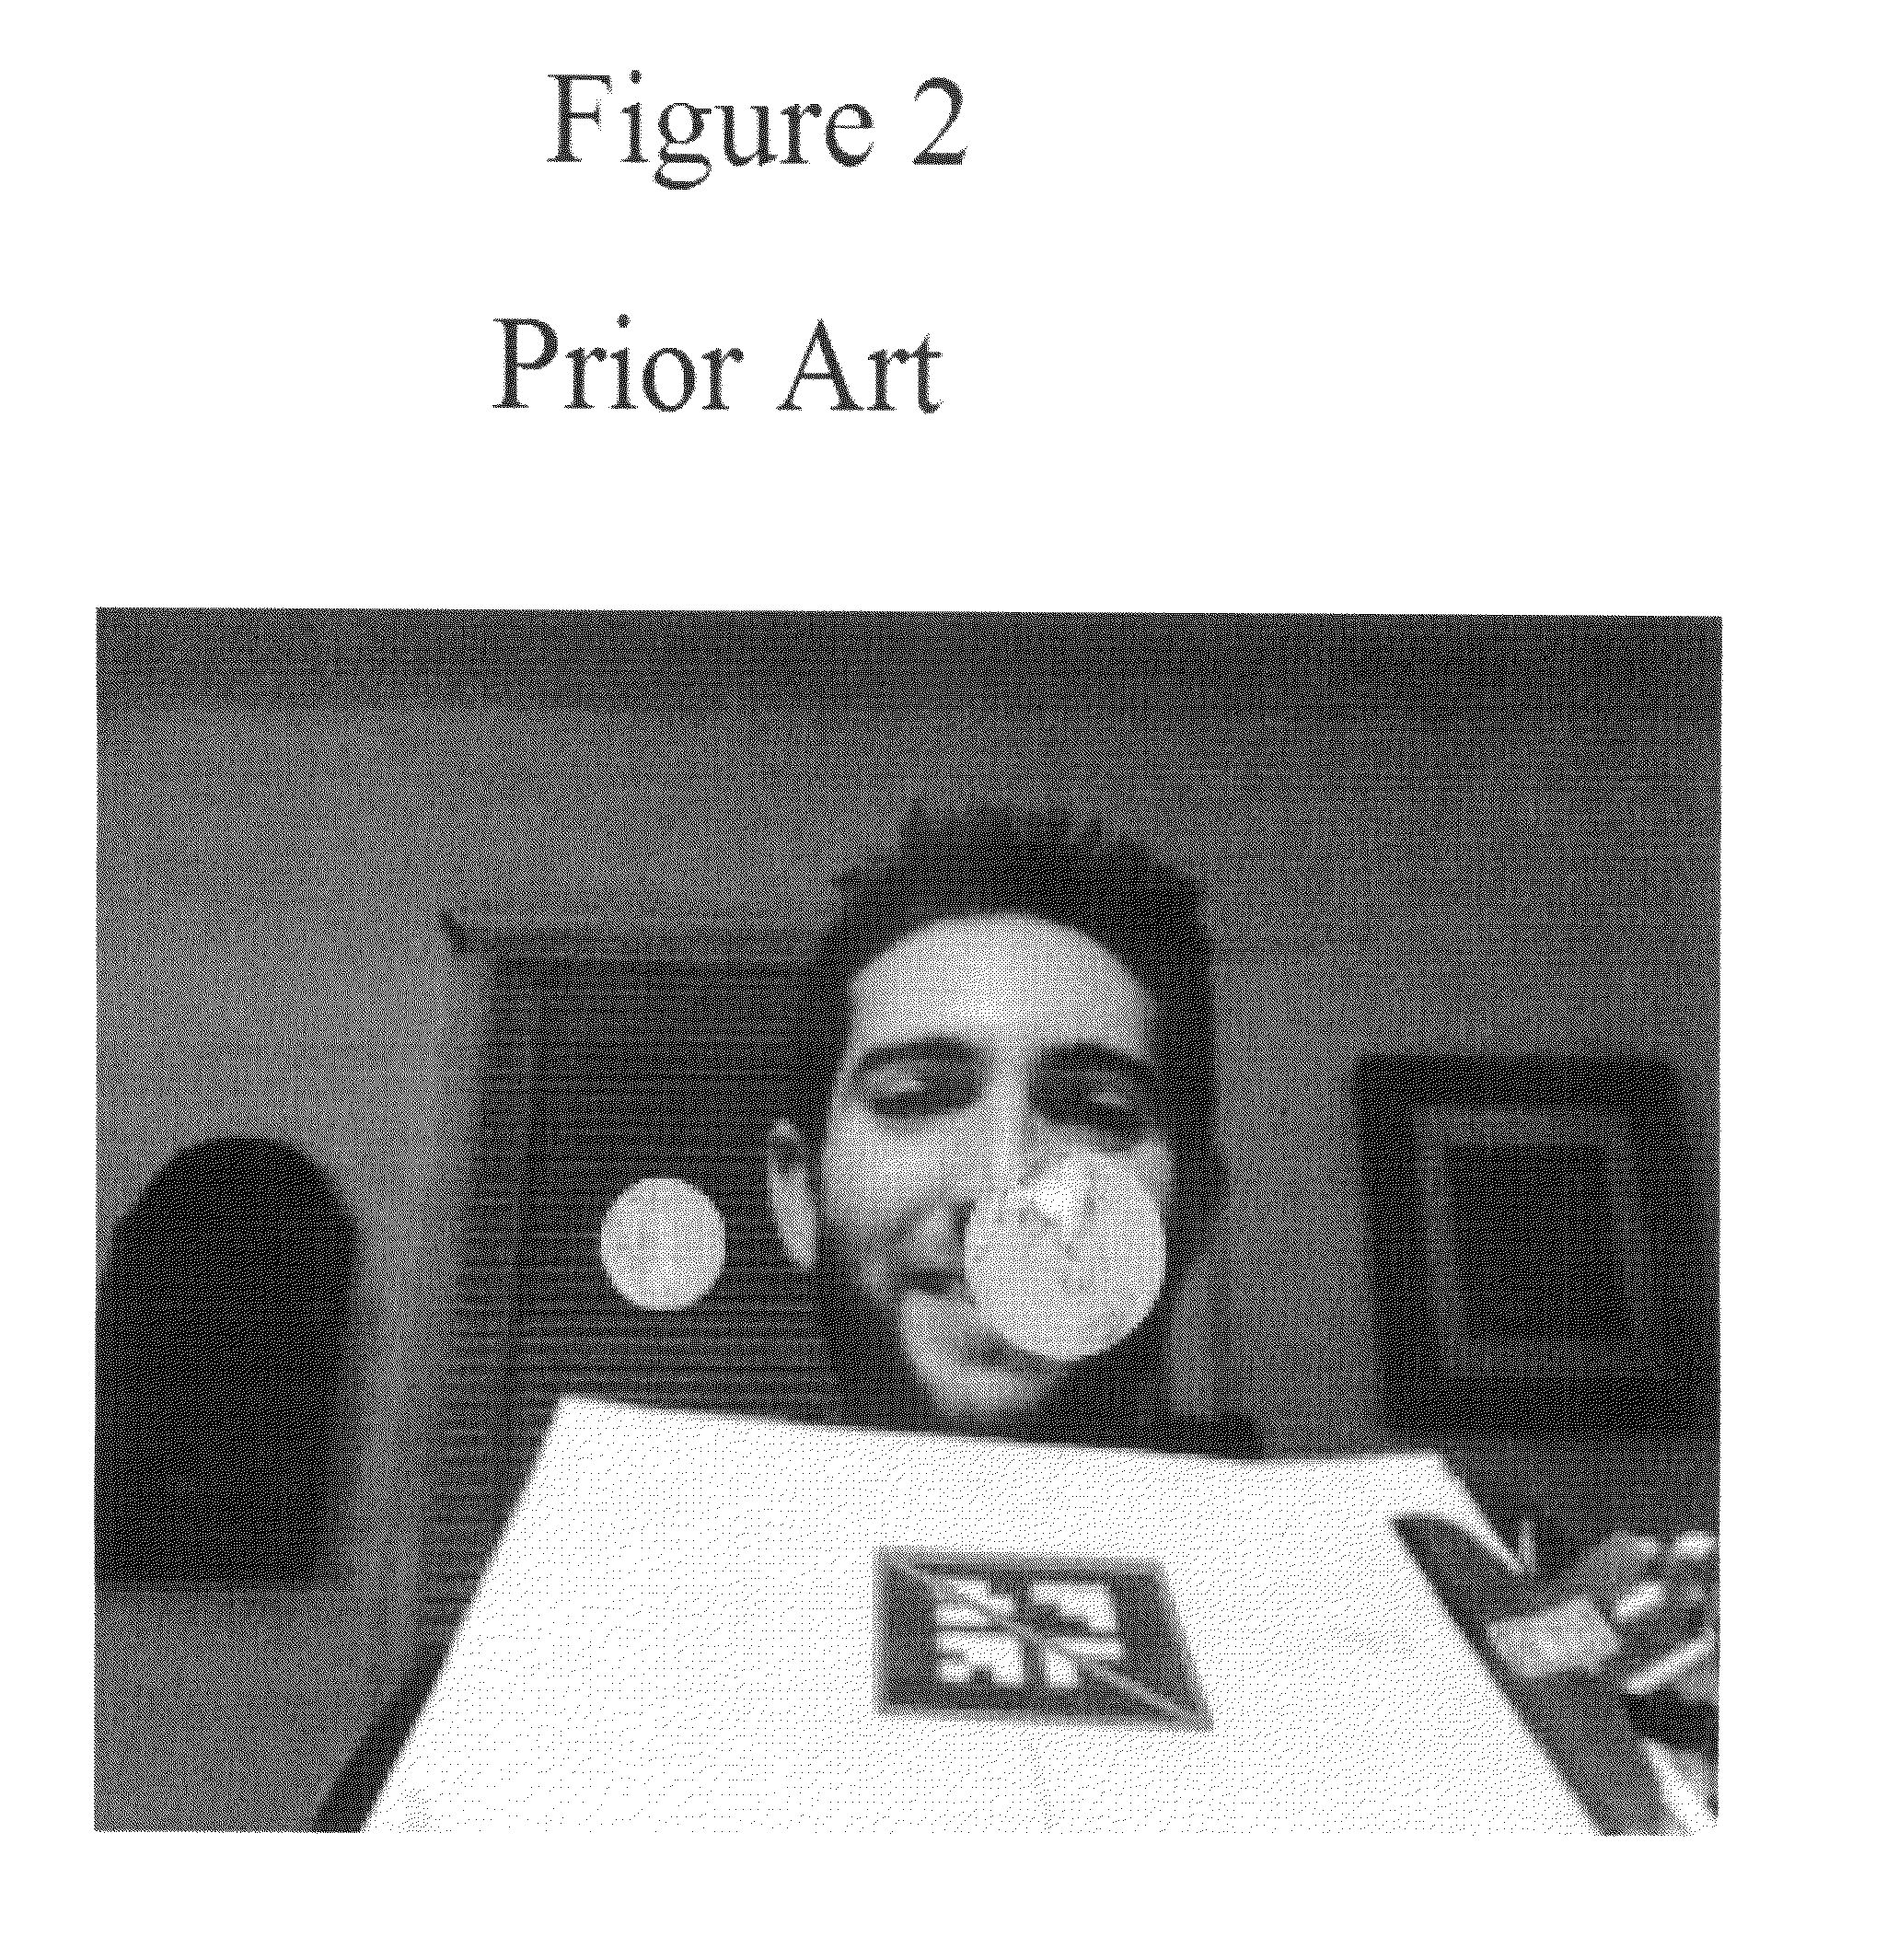 System and method for defining an augmented reality character in computer generated virtual reality using coded stickers